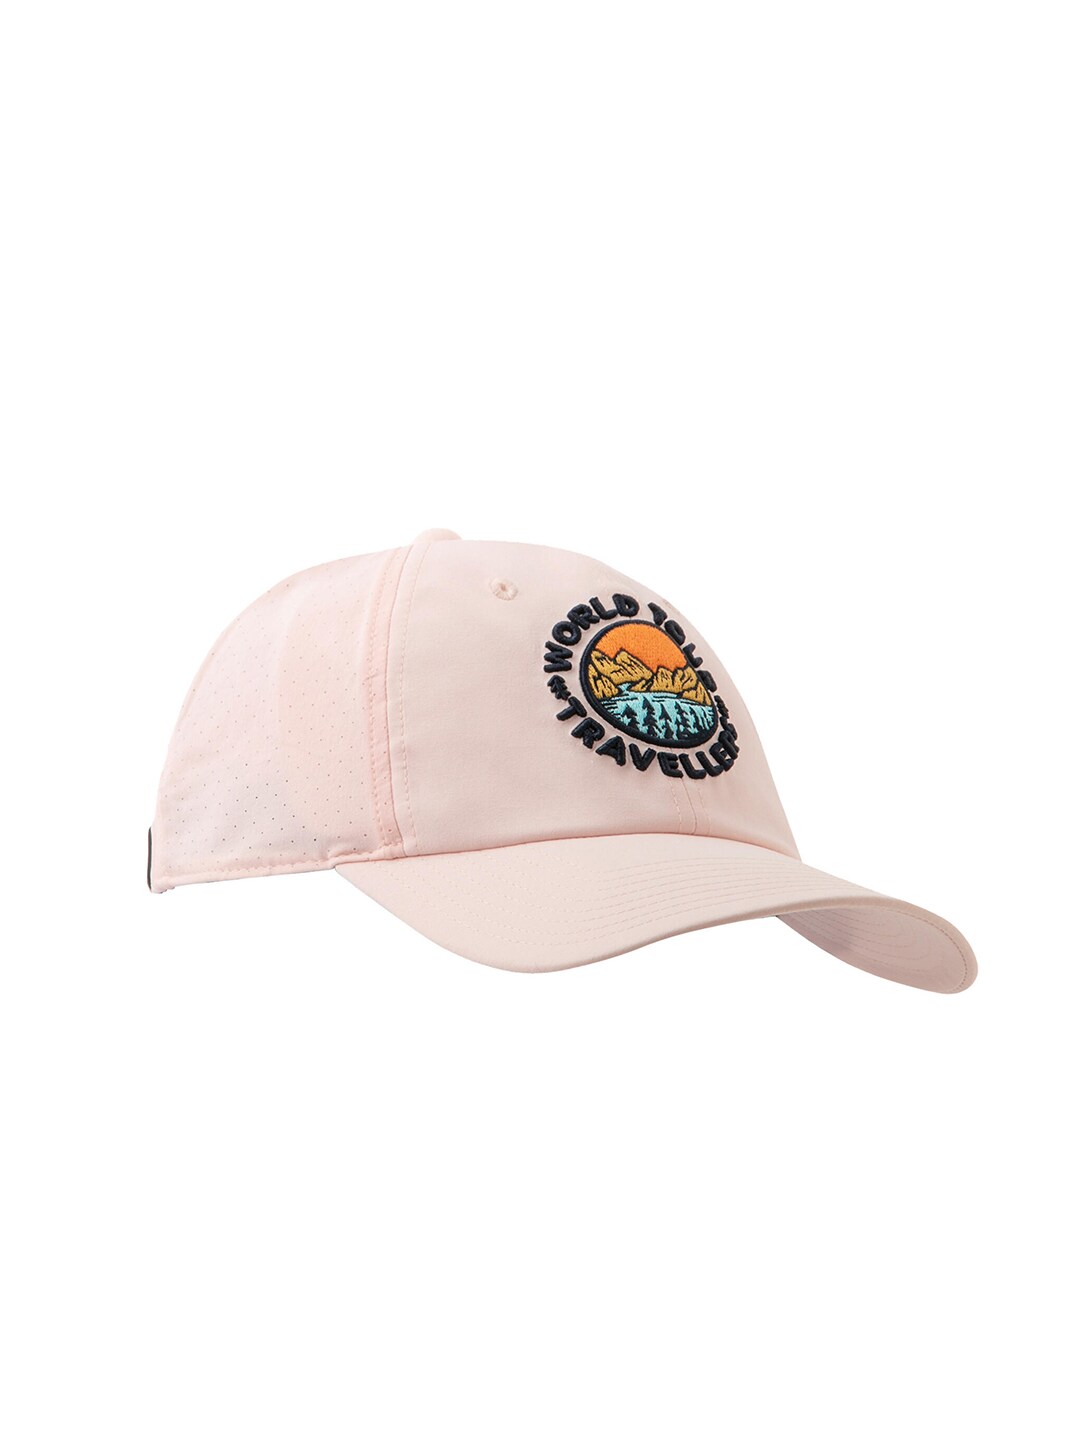 FORCLAZ By Decathlon Unisex Pink Embroidered Baseball Cap Price in India